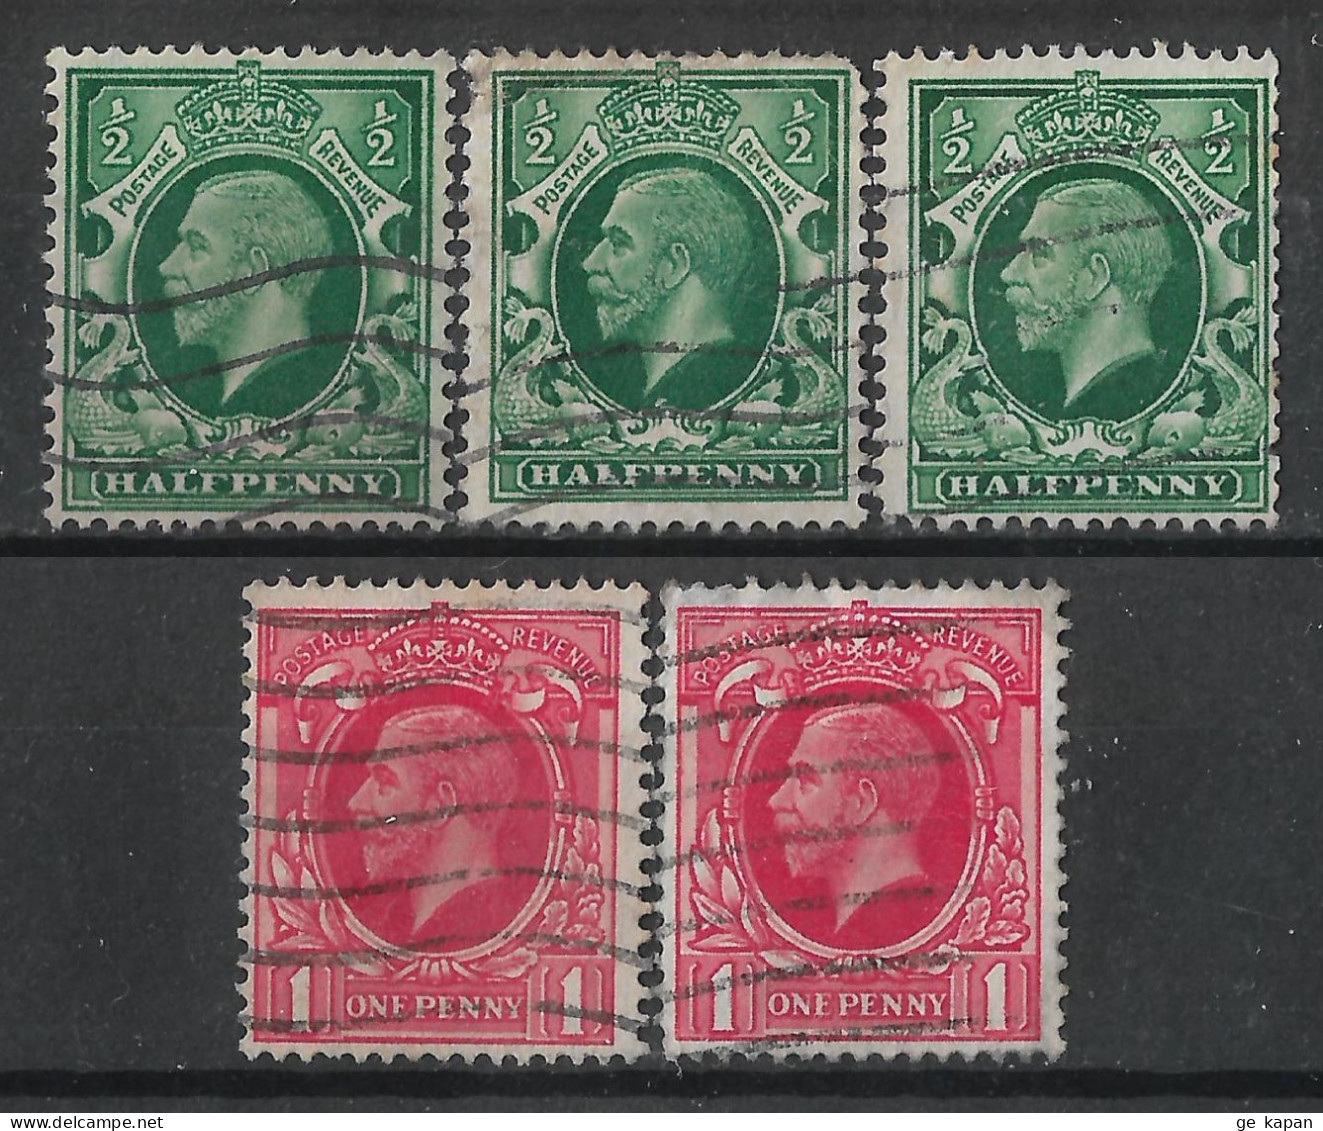 1934 GREAT BRITAIN Set Of 5 Used Stamps (Scott # 210,211) CV $3.00 - Used Stamps